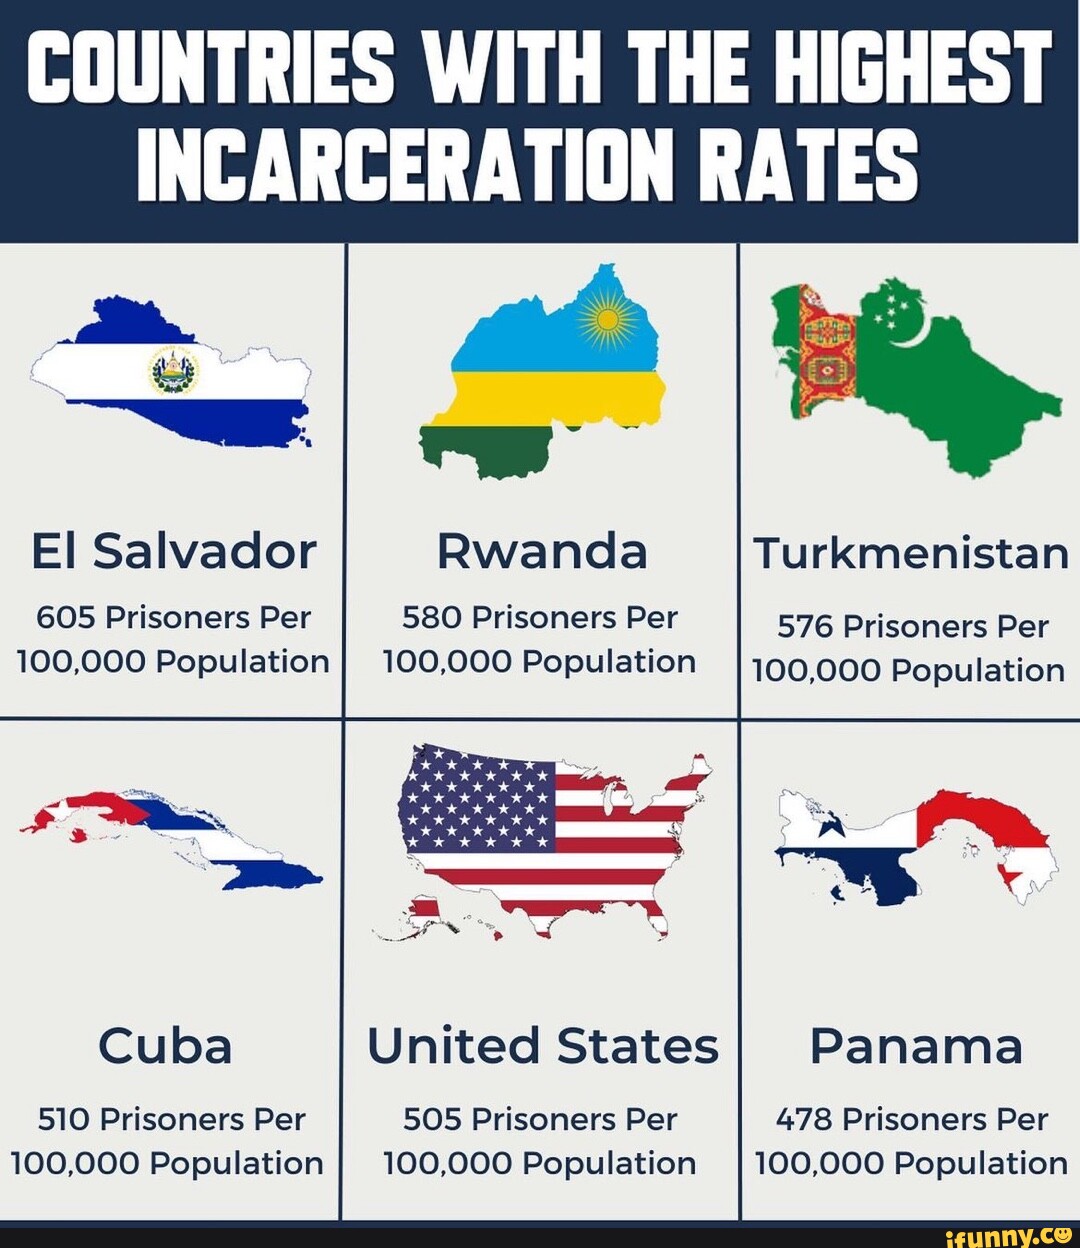 COUNTRIES WITH THE HIGHEST INCARCERATION RATES Rwanda Turkmenistan 580